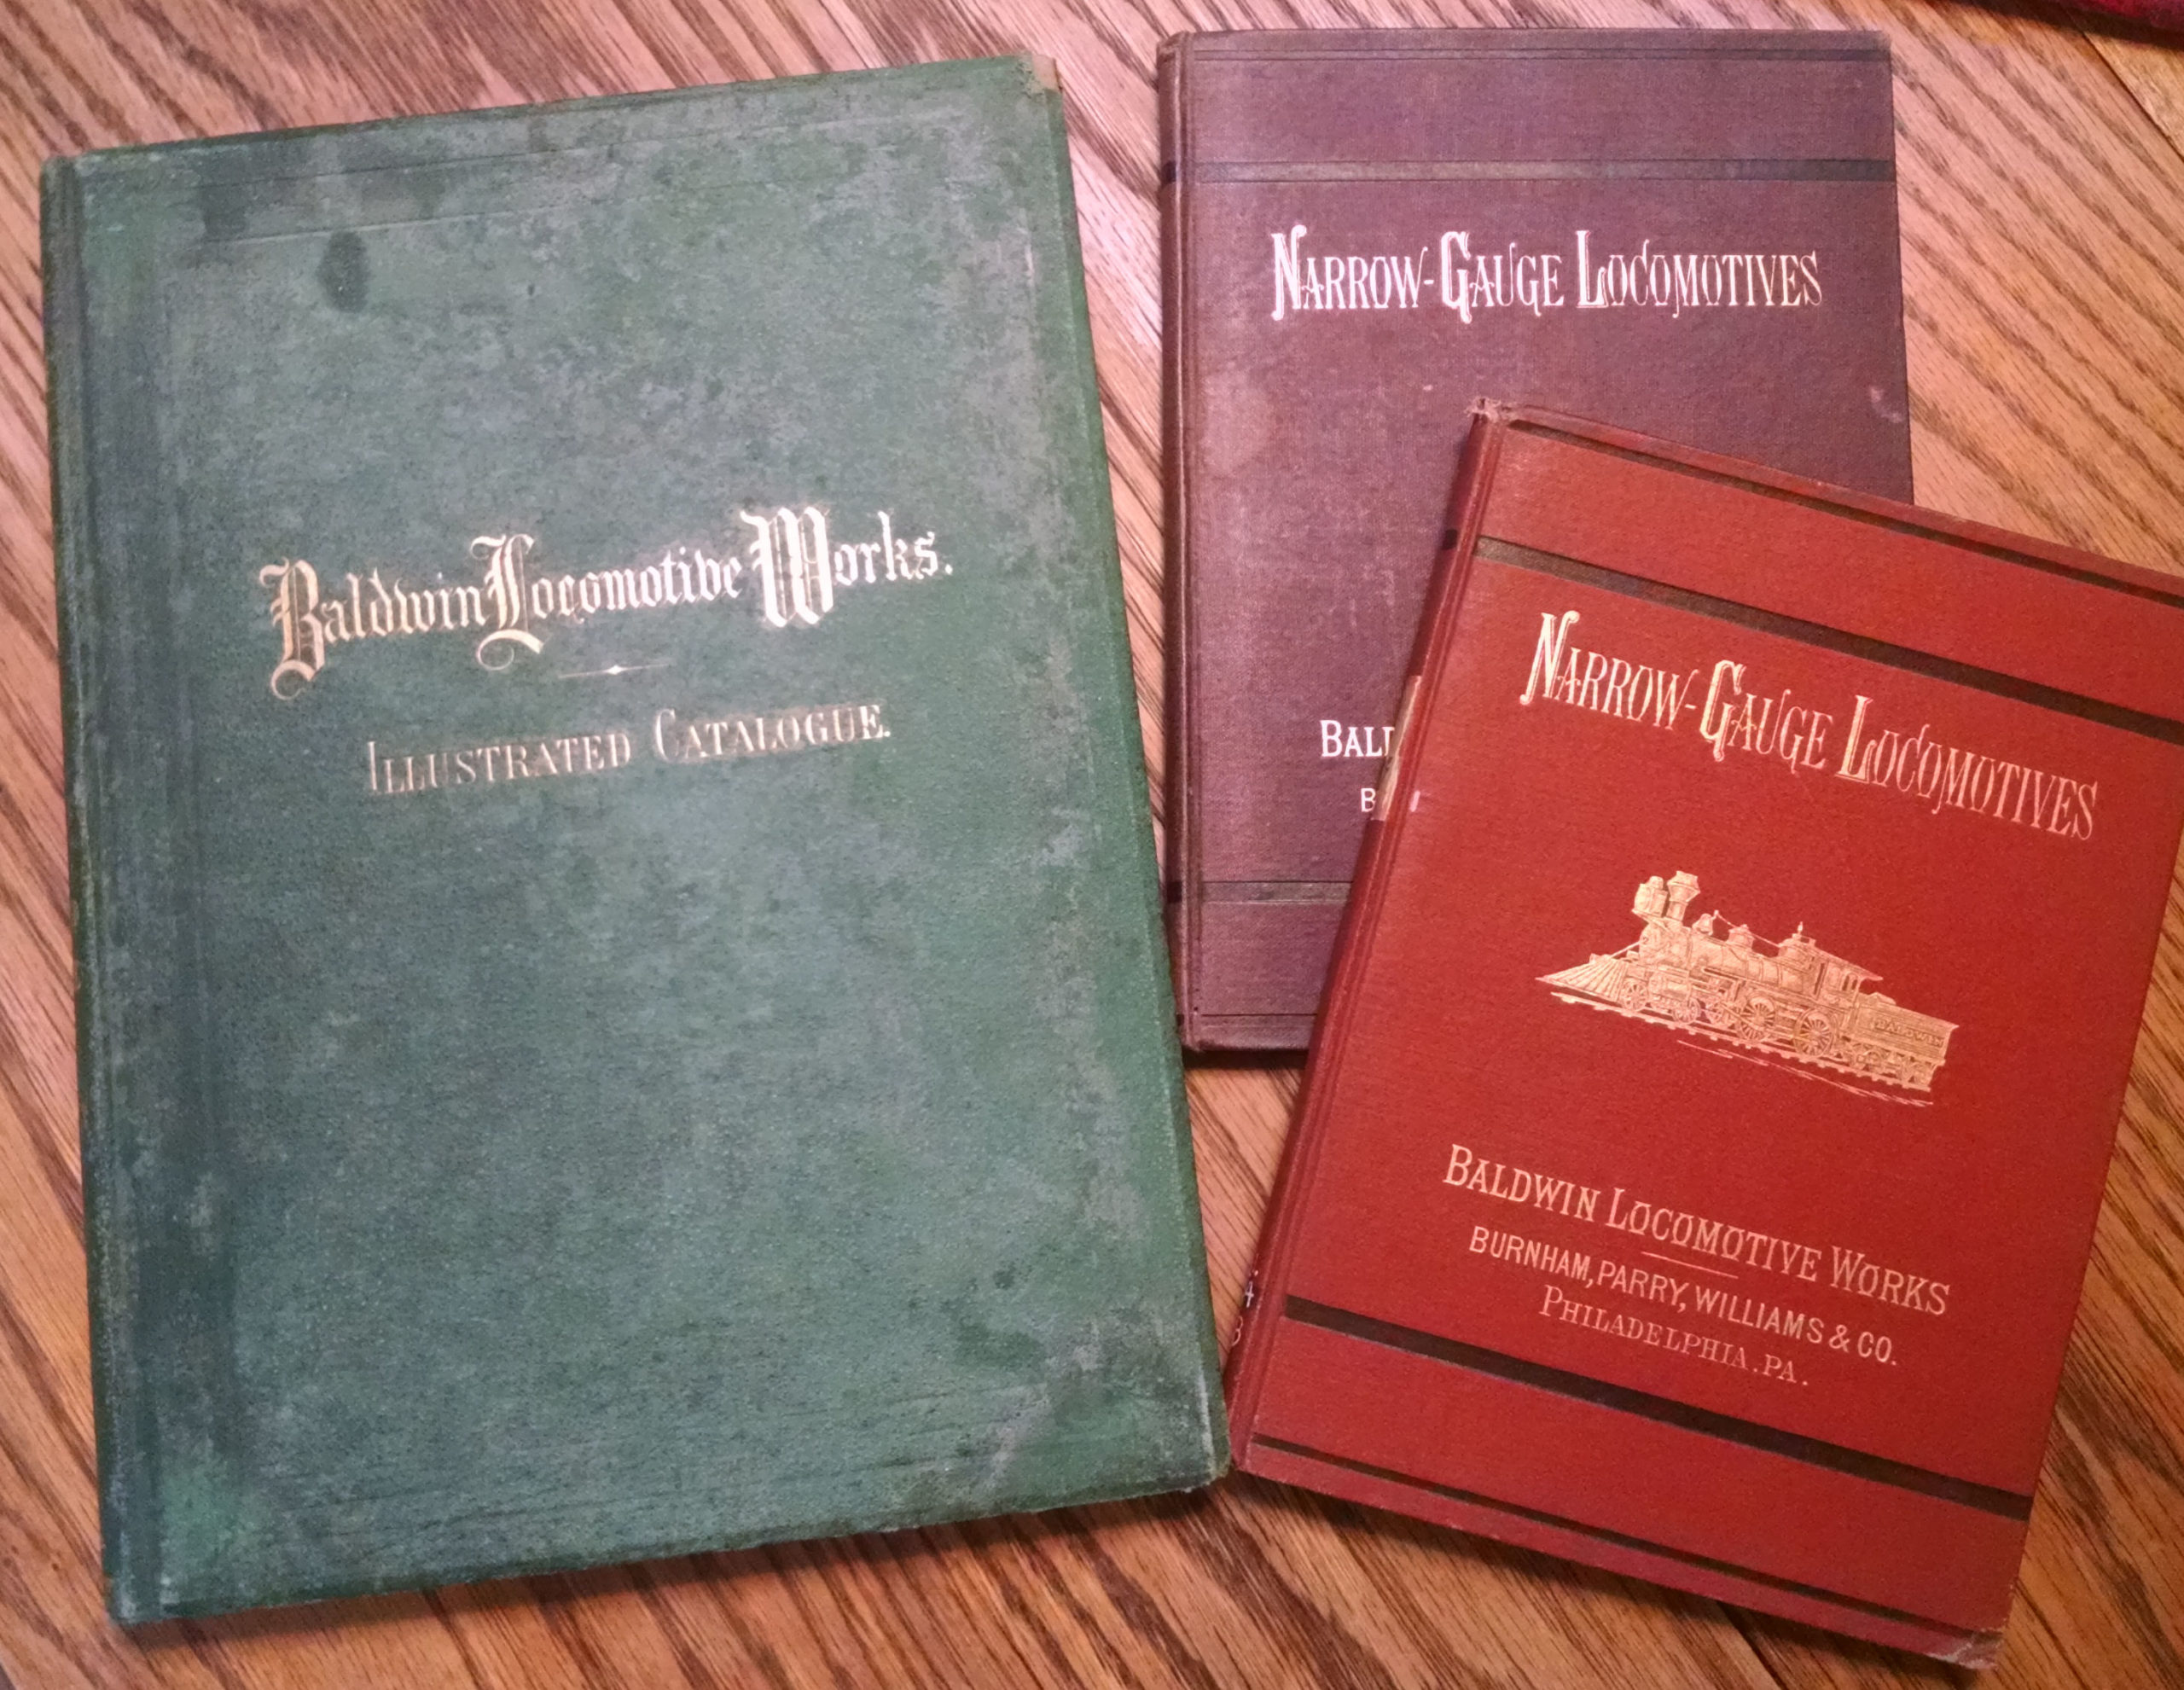 Early catalogues from the Baldwin Locomotive Works